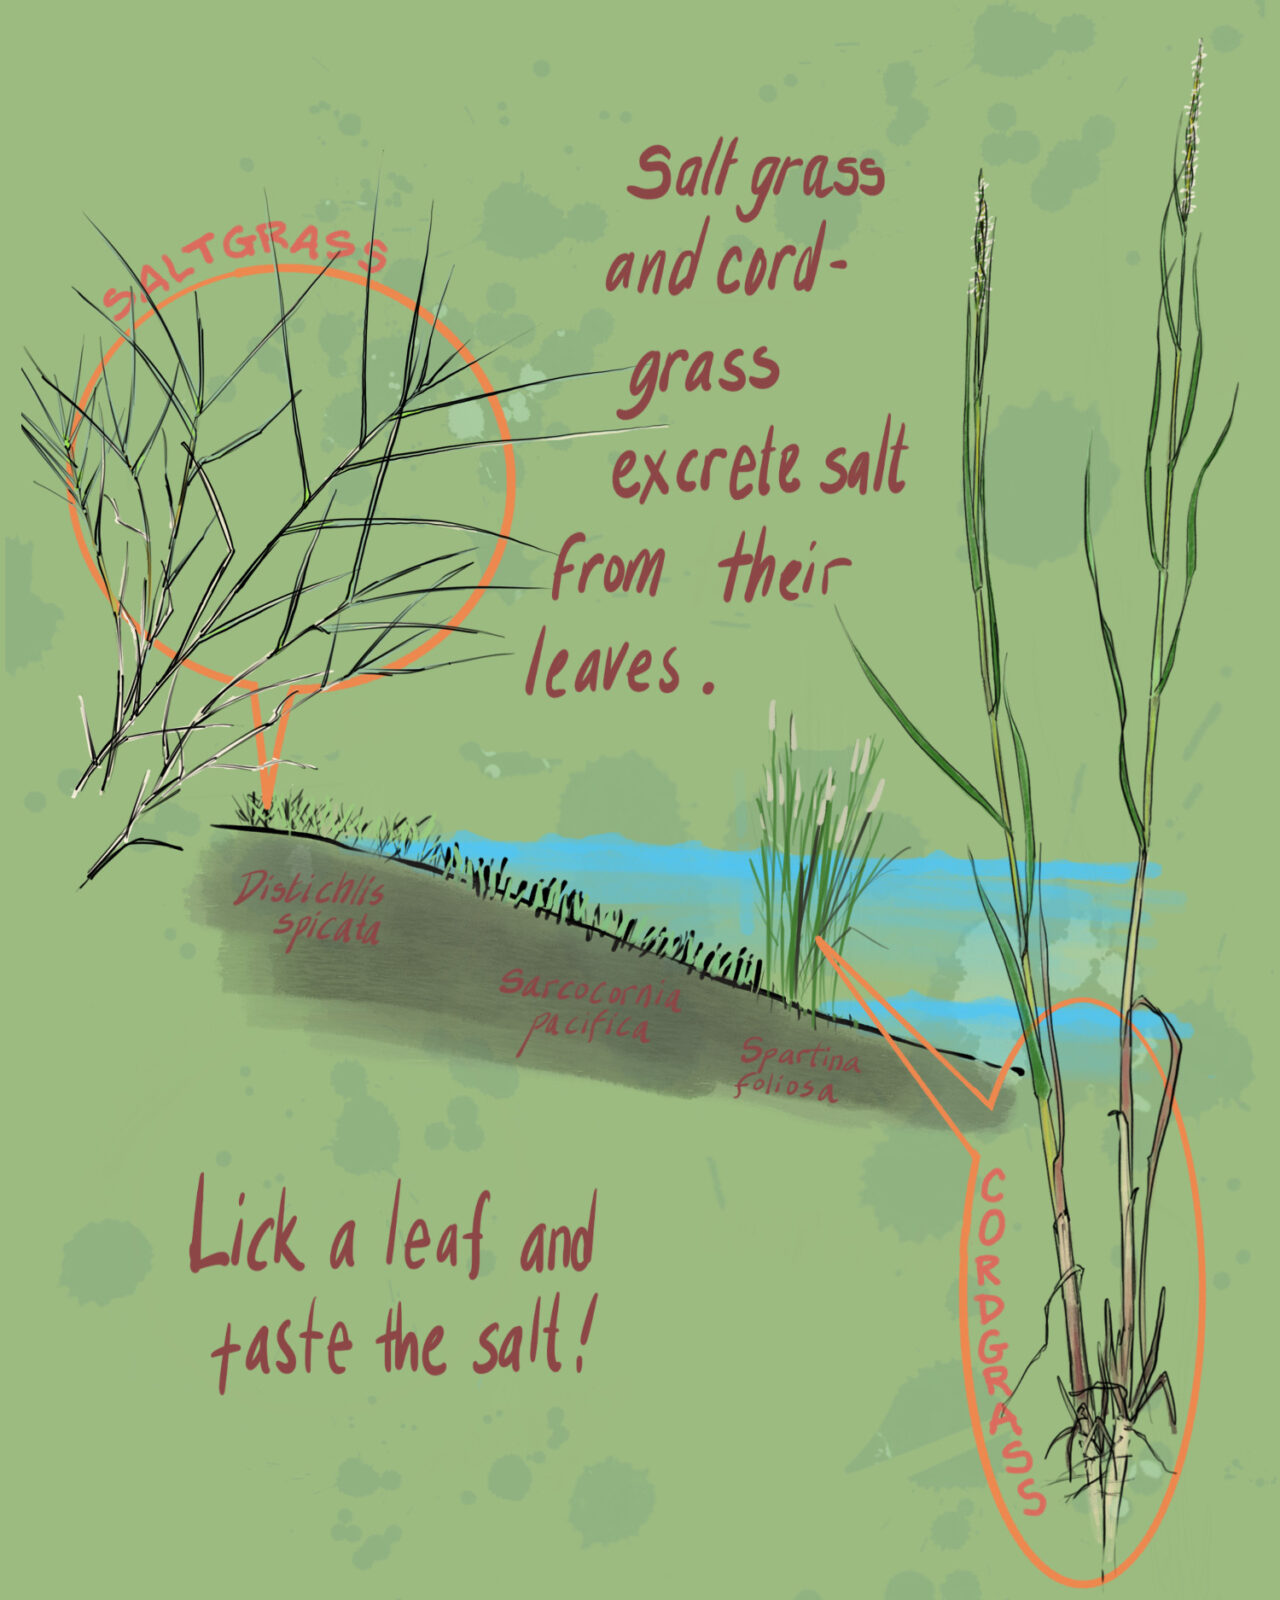 Salt grass and cordgrass excrete salt from their leaves. Lick a leaf and taste the salt!
